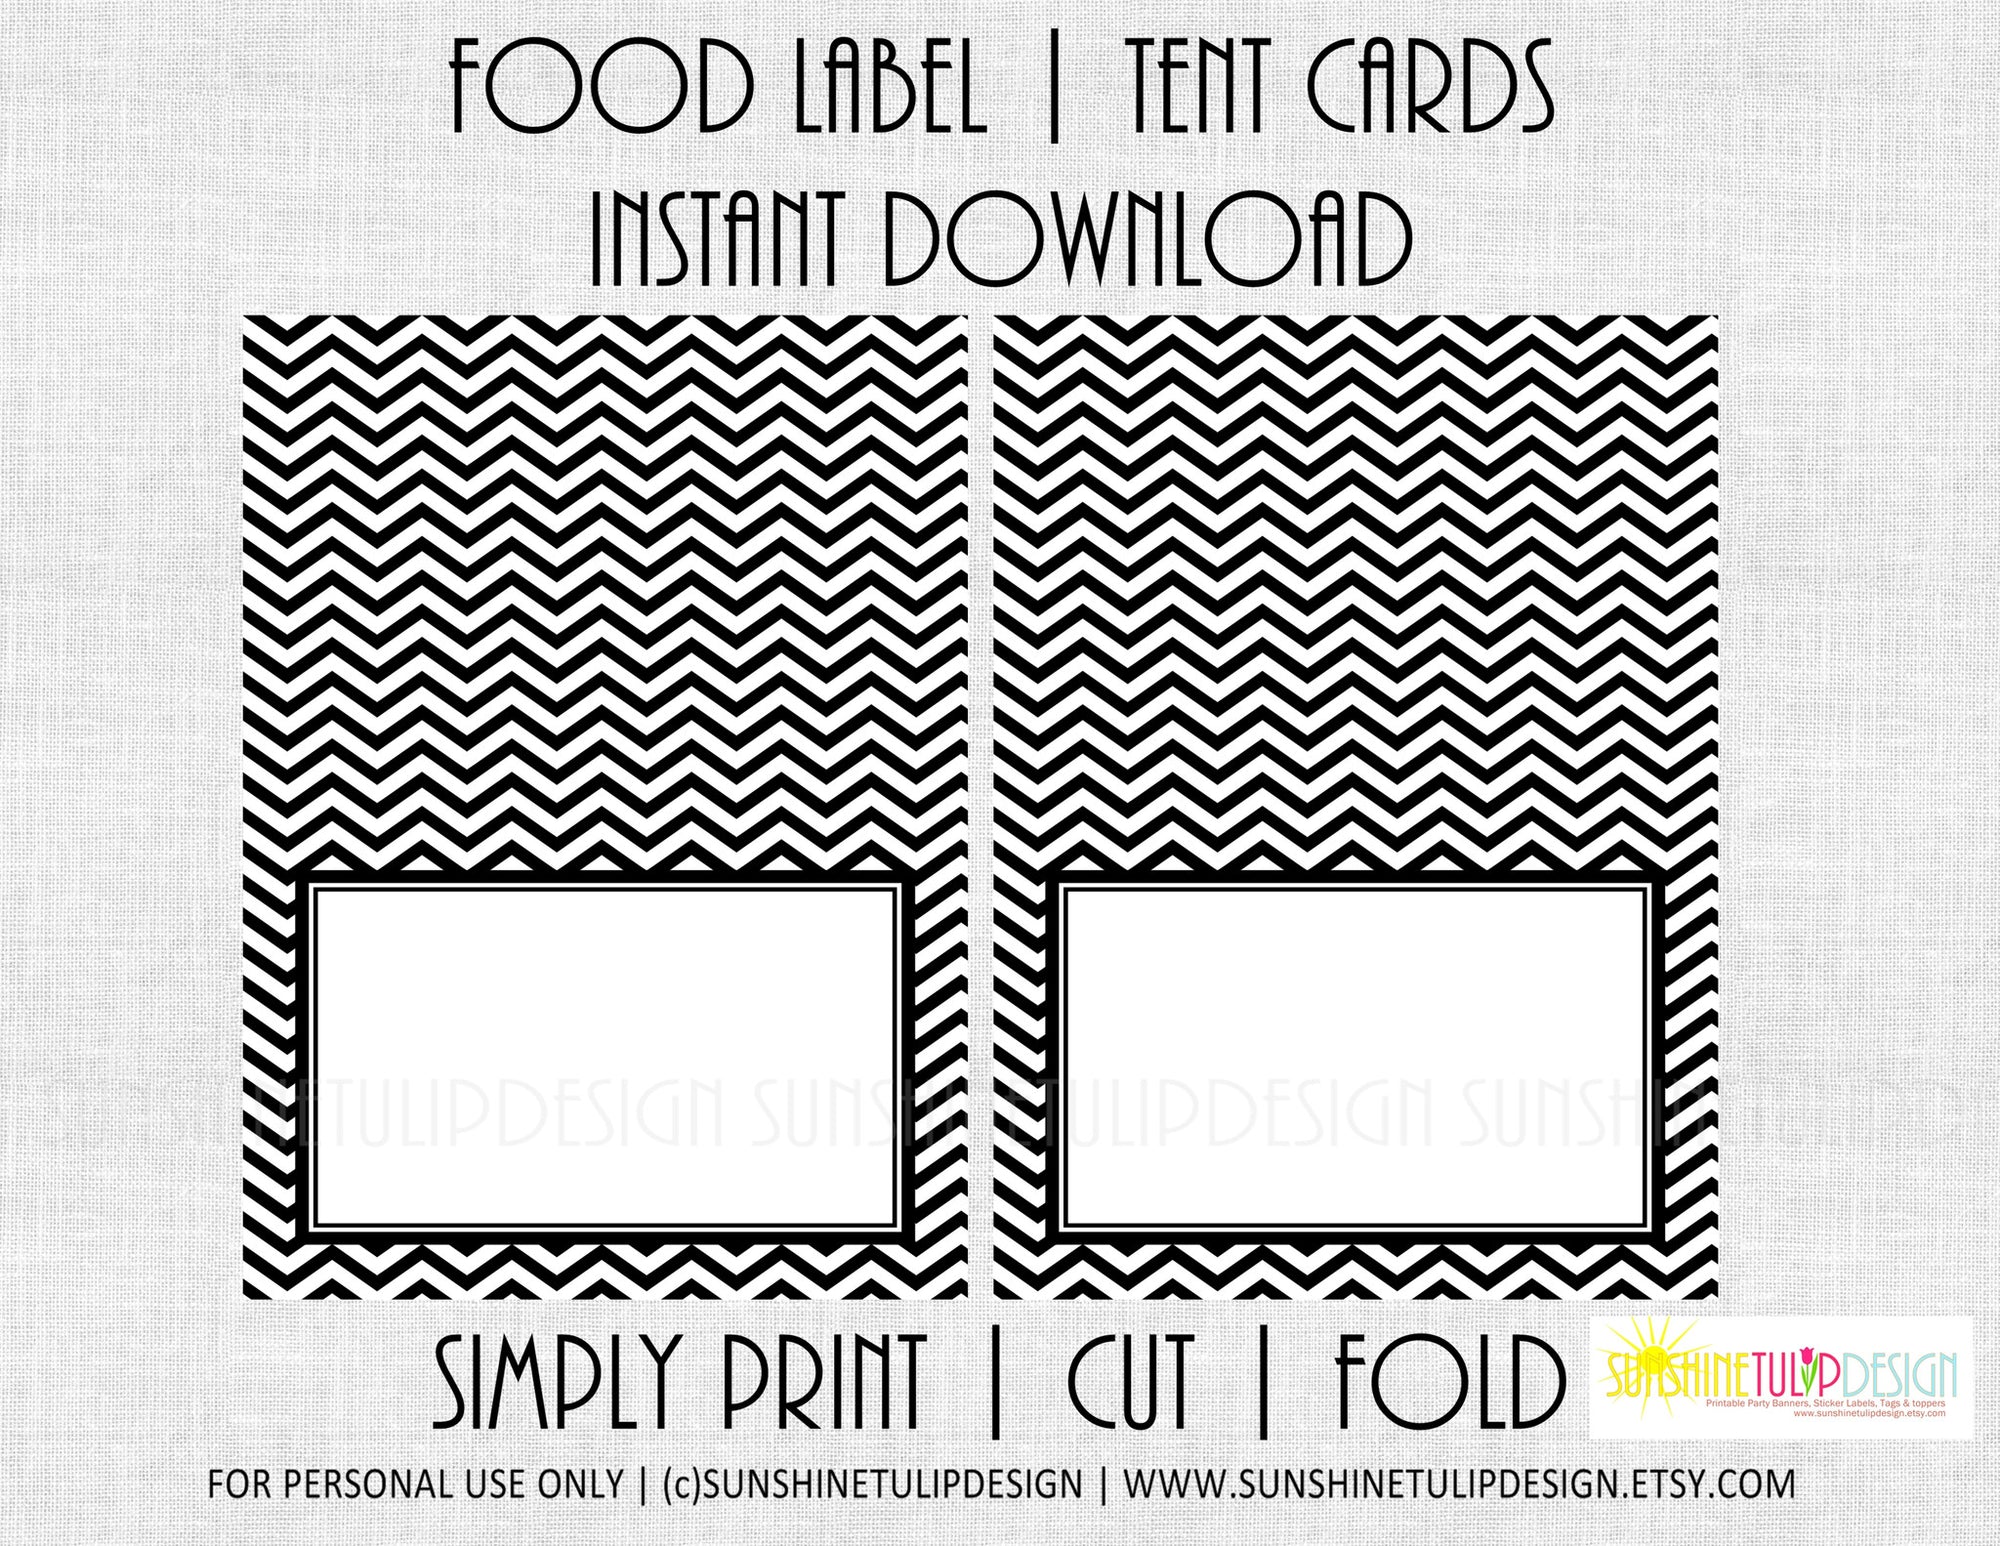 printable food label tent cards black white chevron all occasion car